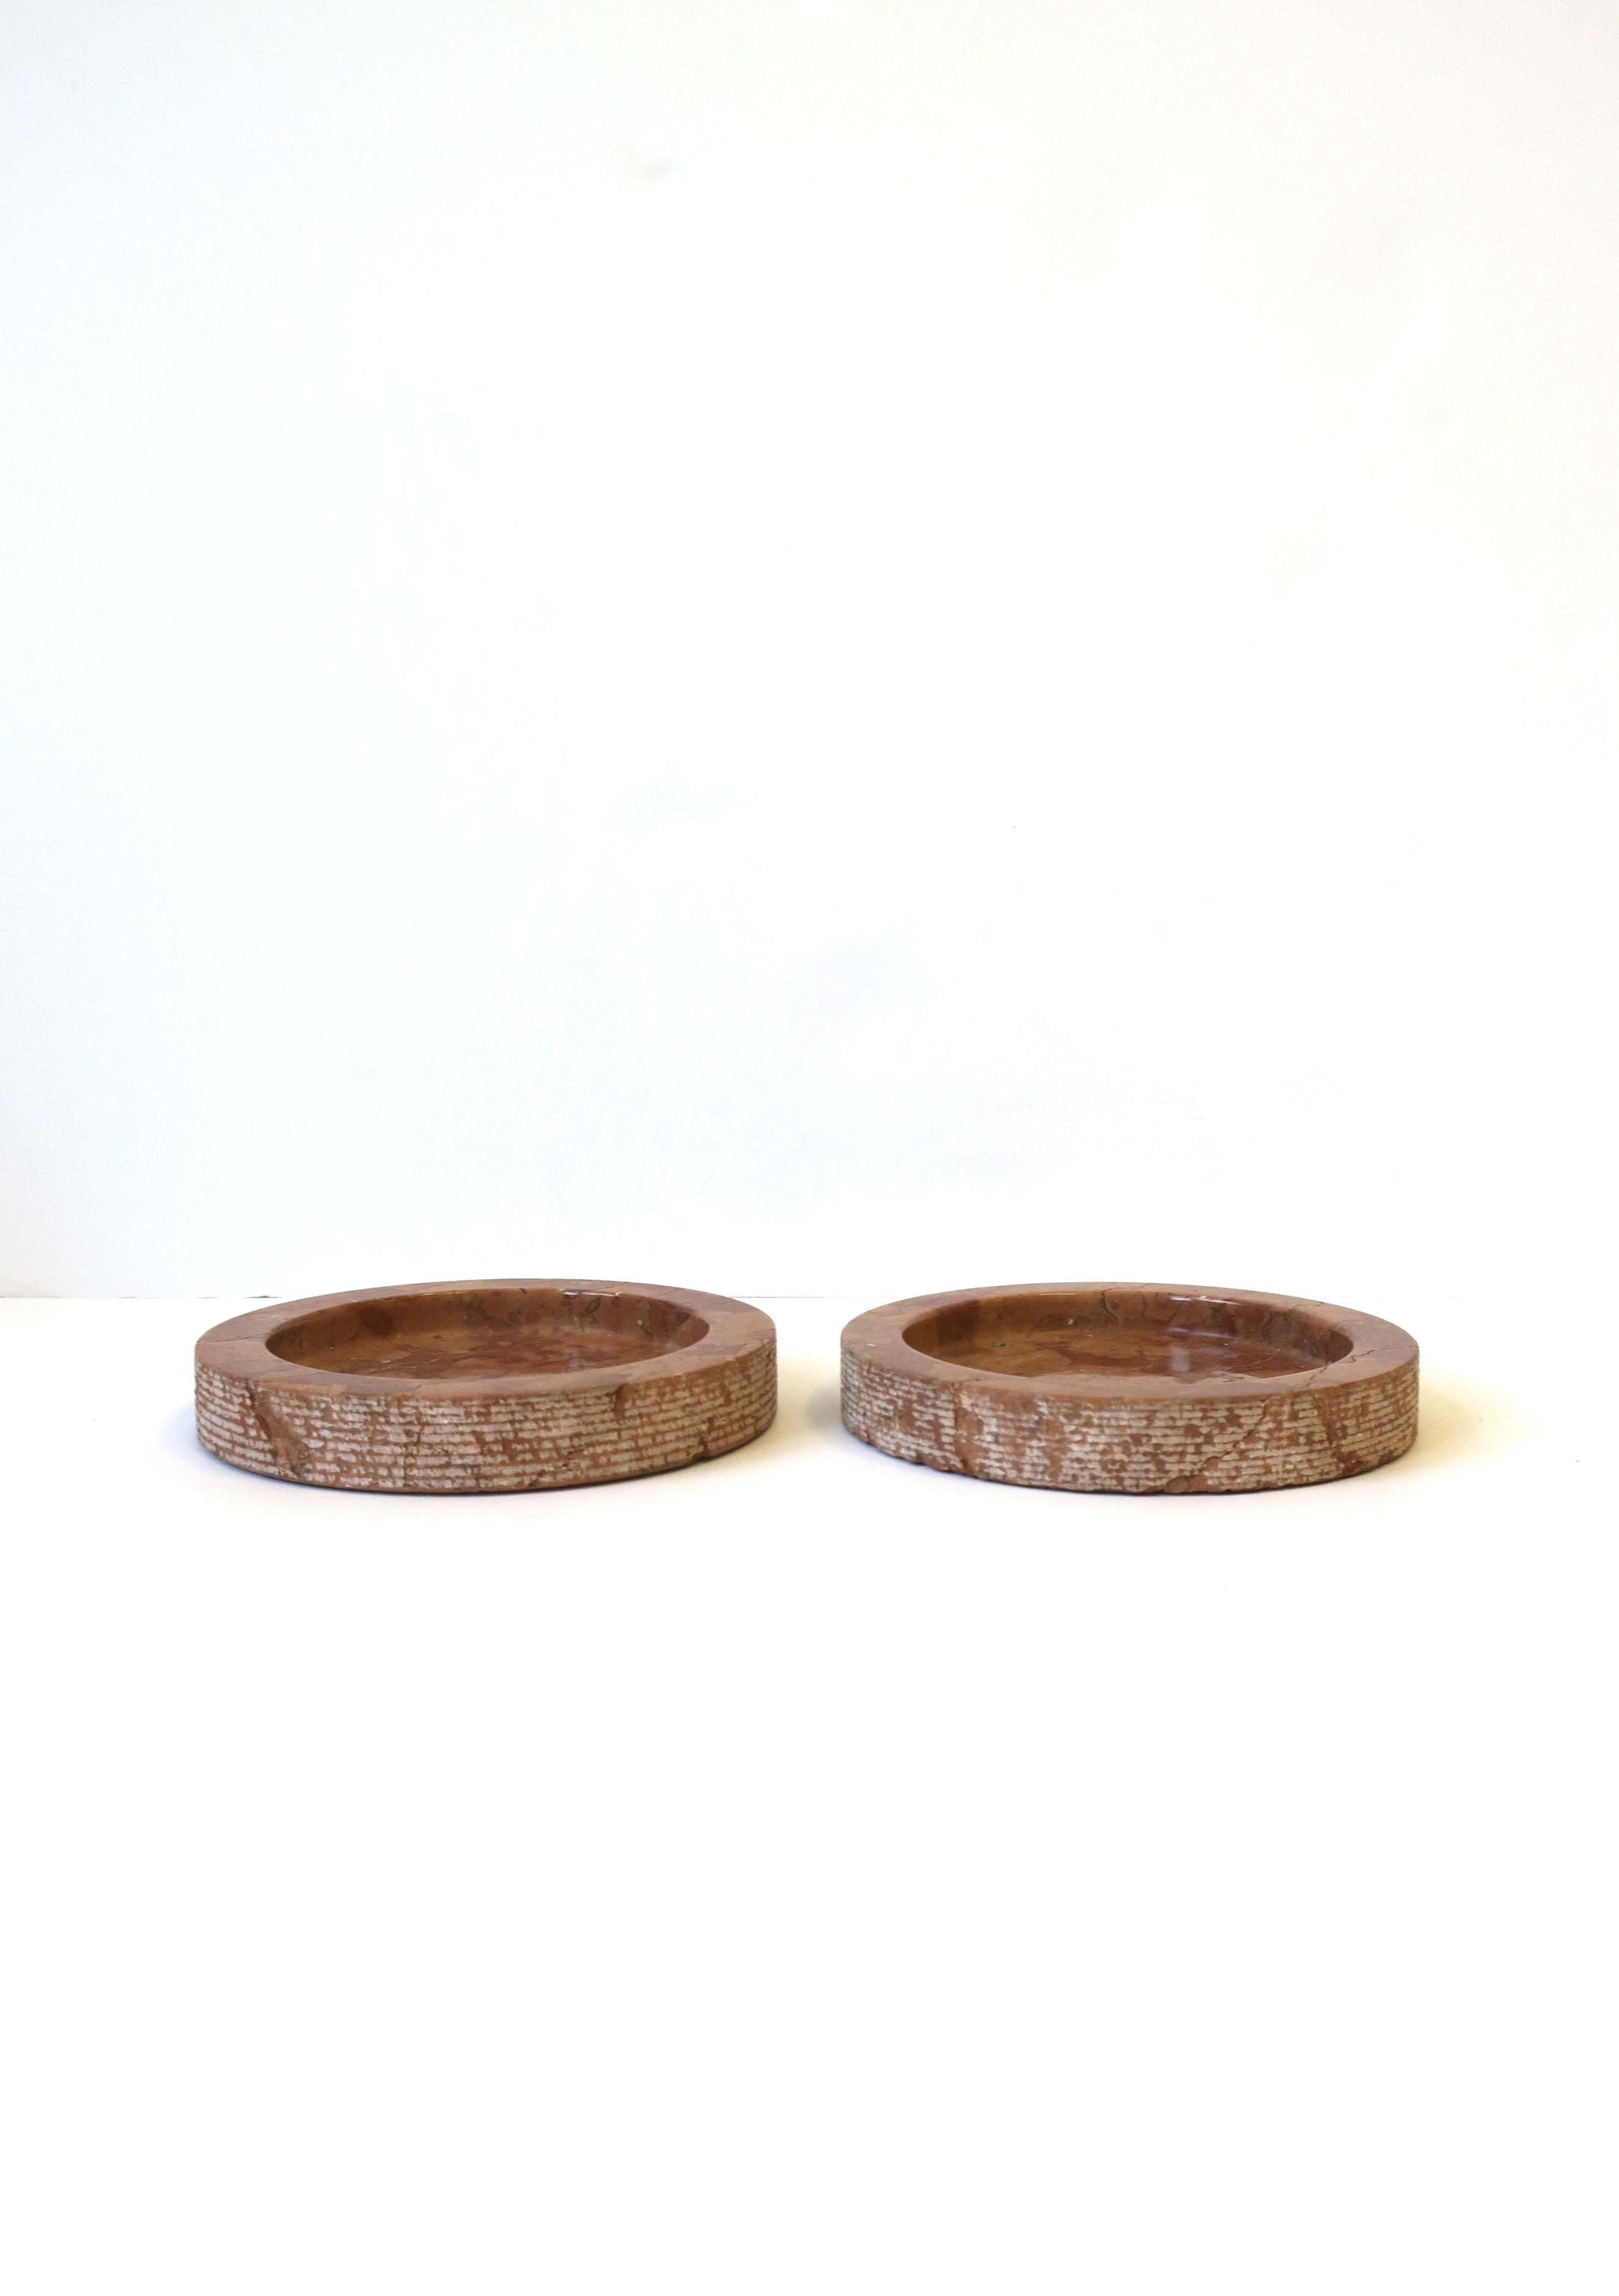 Italian Postmodern Marble Terracotta Wine Bottle Coaster or Catchall, Set of 2 In Good Condition For Sale In New York, NY